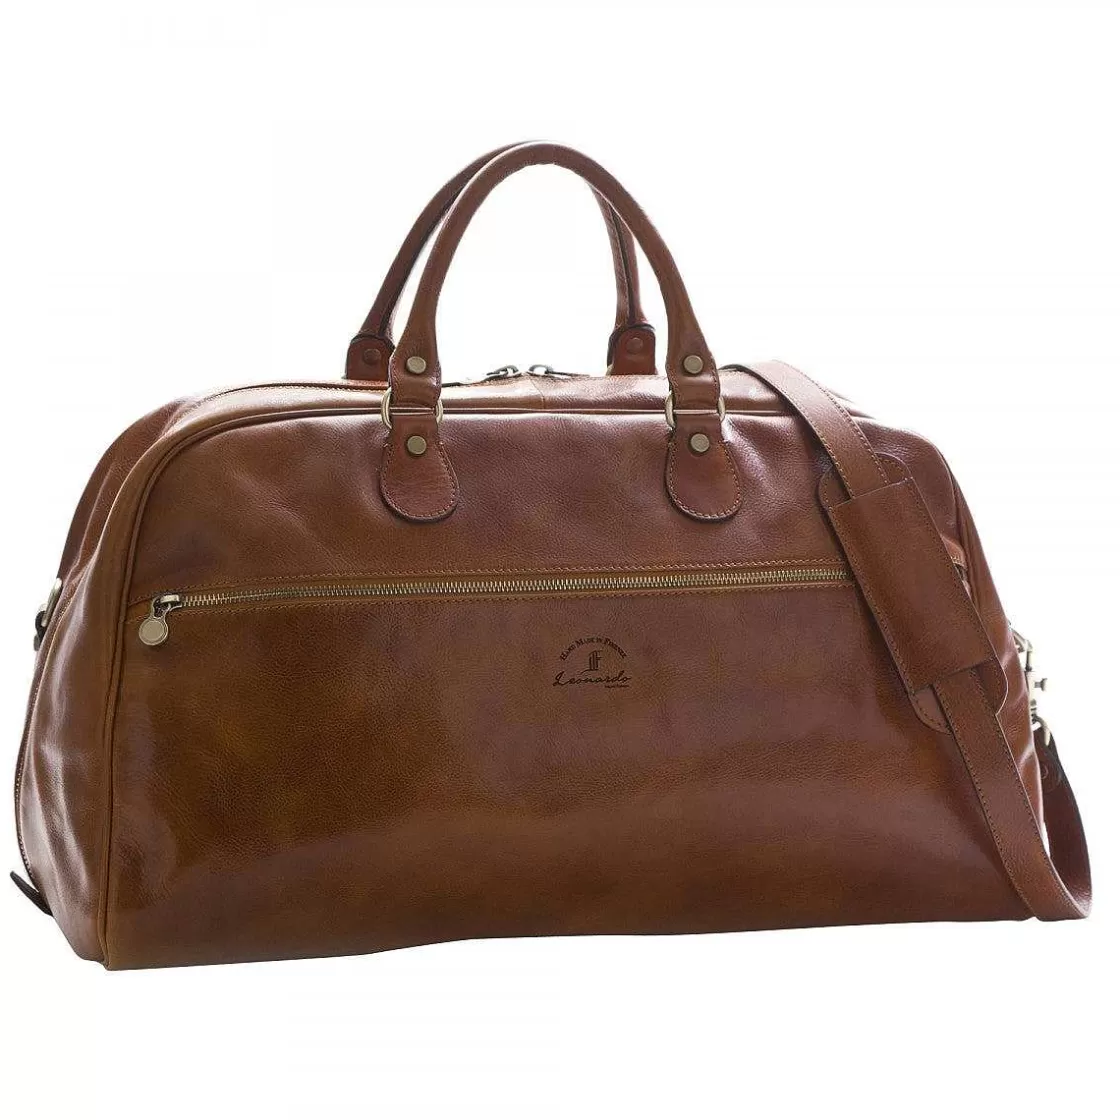 Leonardo Large Travel Bag In Full Grain Leather With Double Zip Front Pocket And Adjustable Shoulder Strap Discount